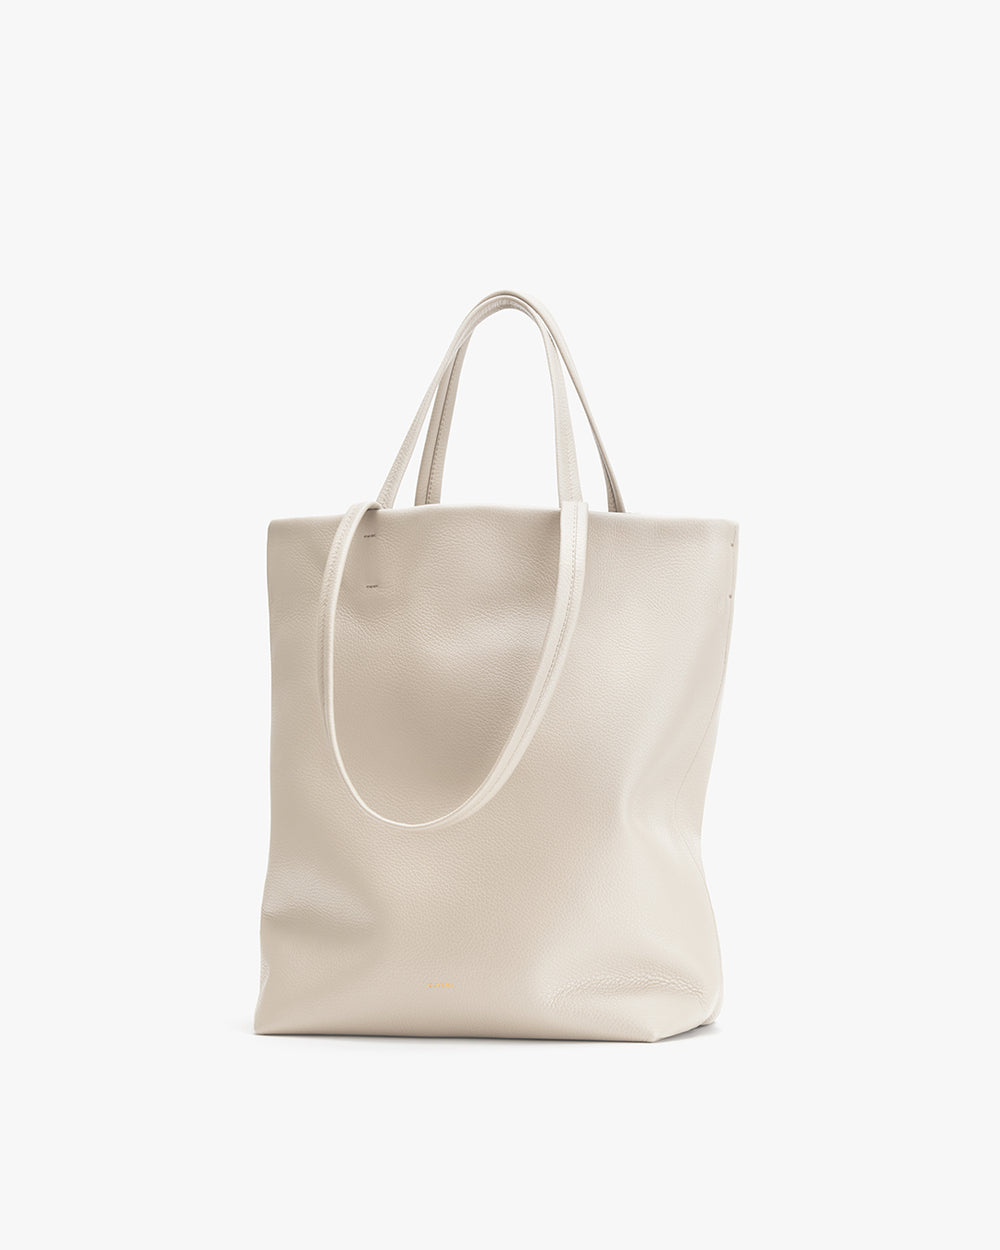 Vertical tote bag with two handles standing upright.